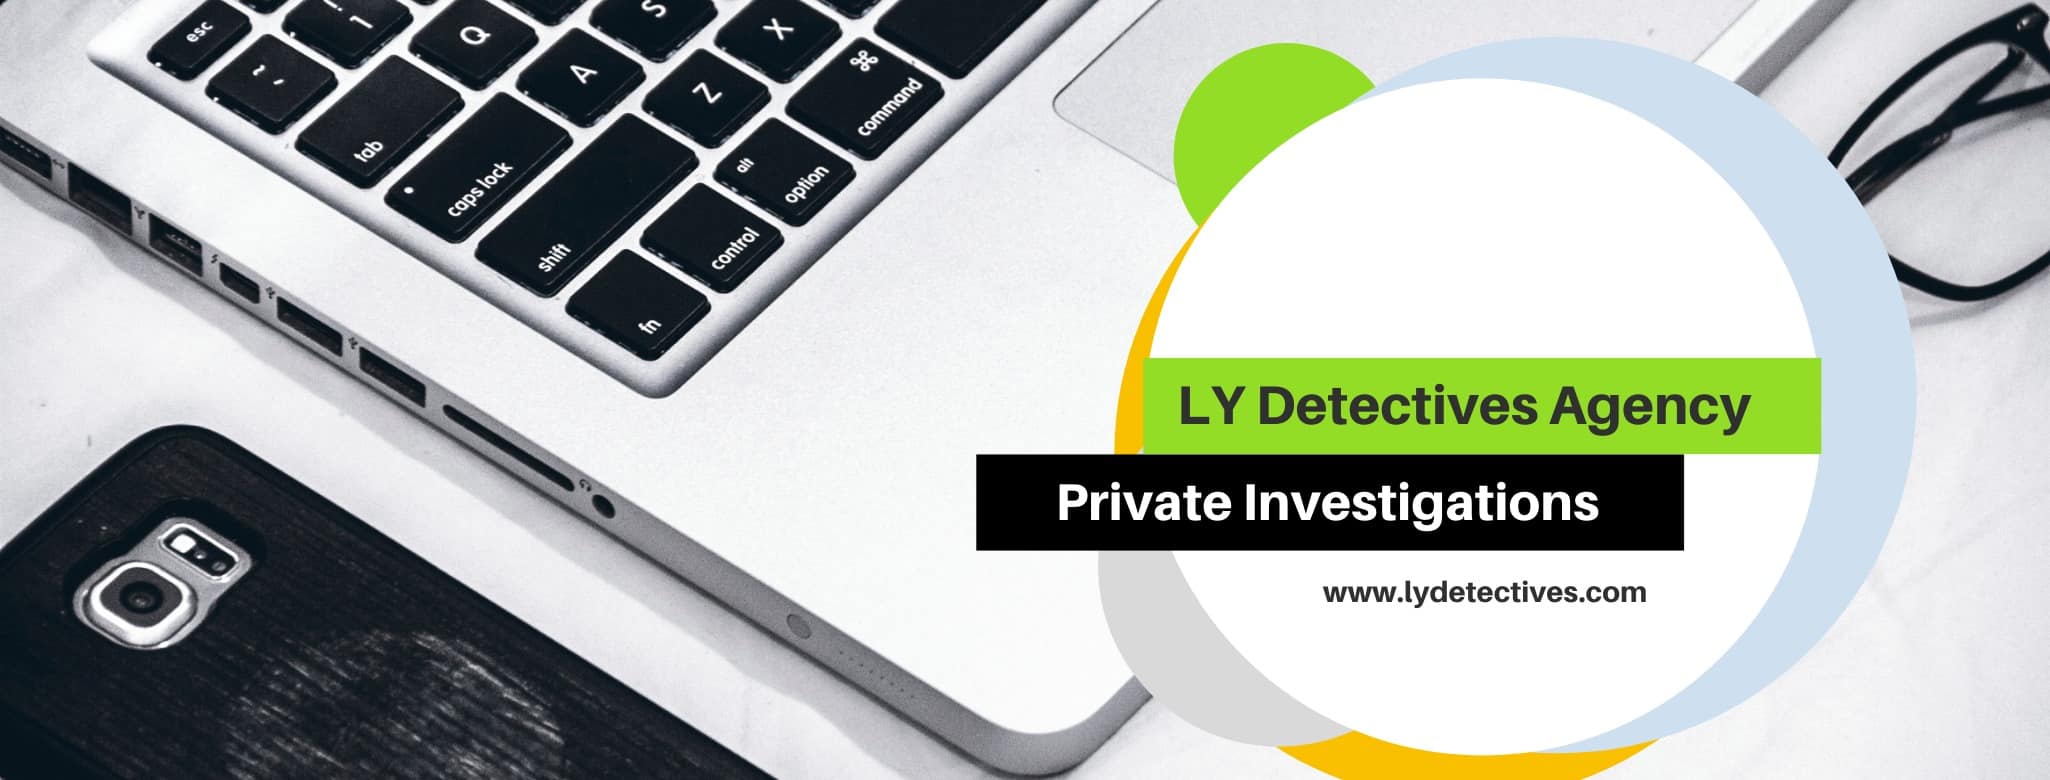 LY DETECTIVE AGENCY